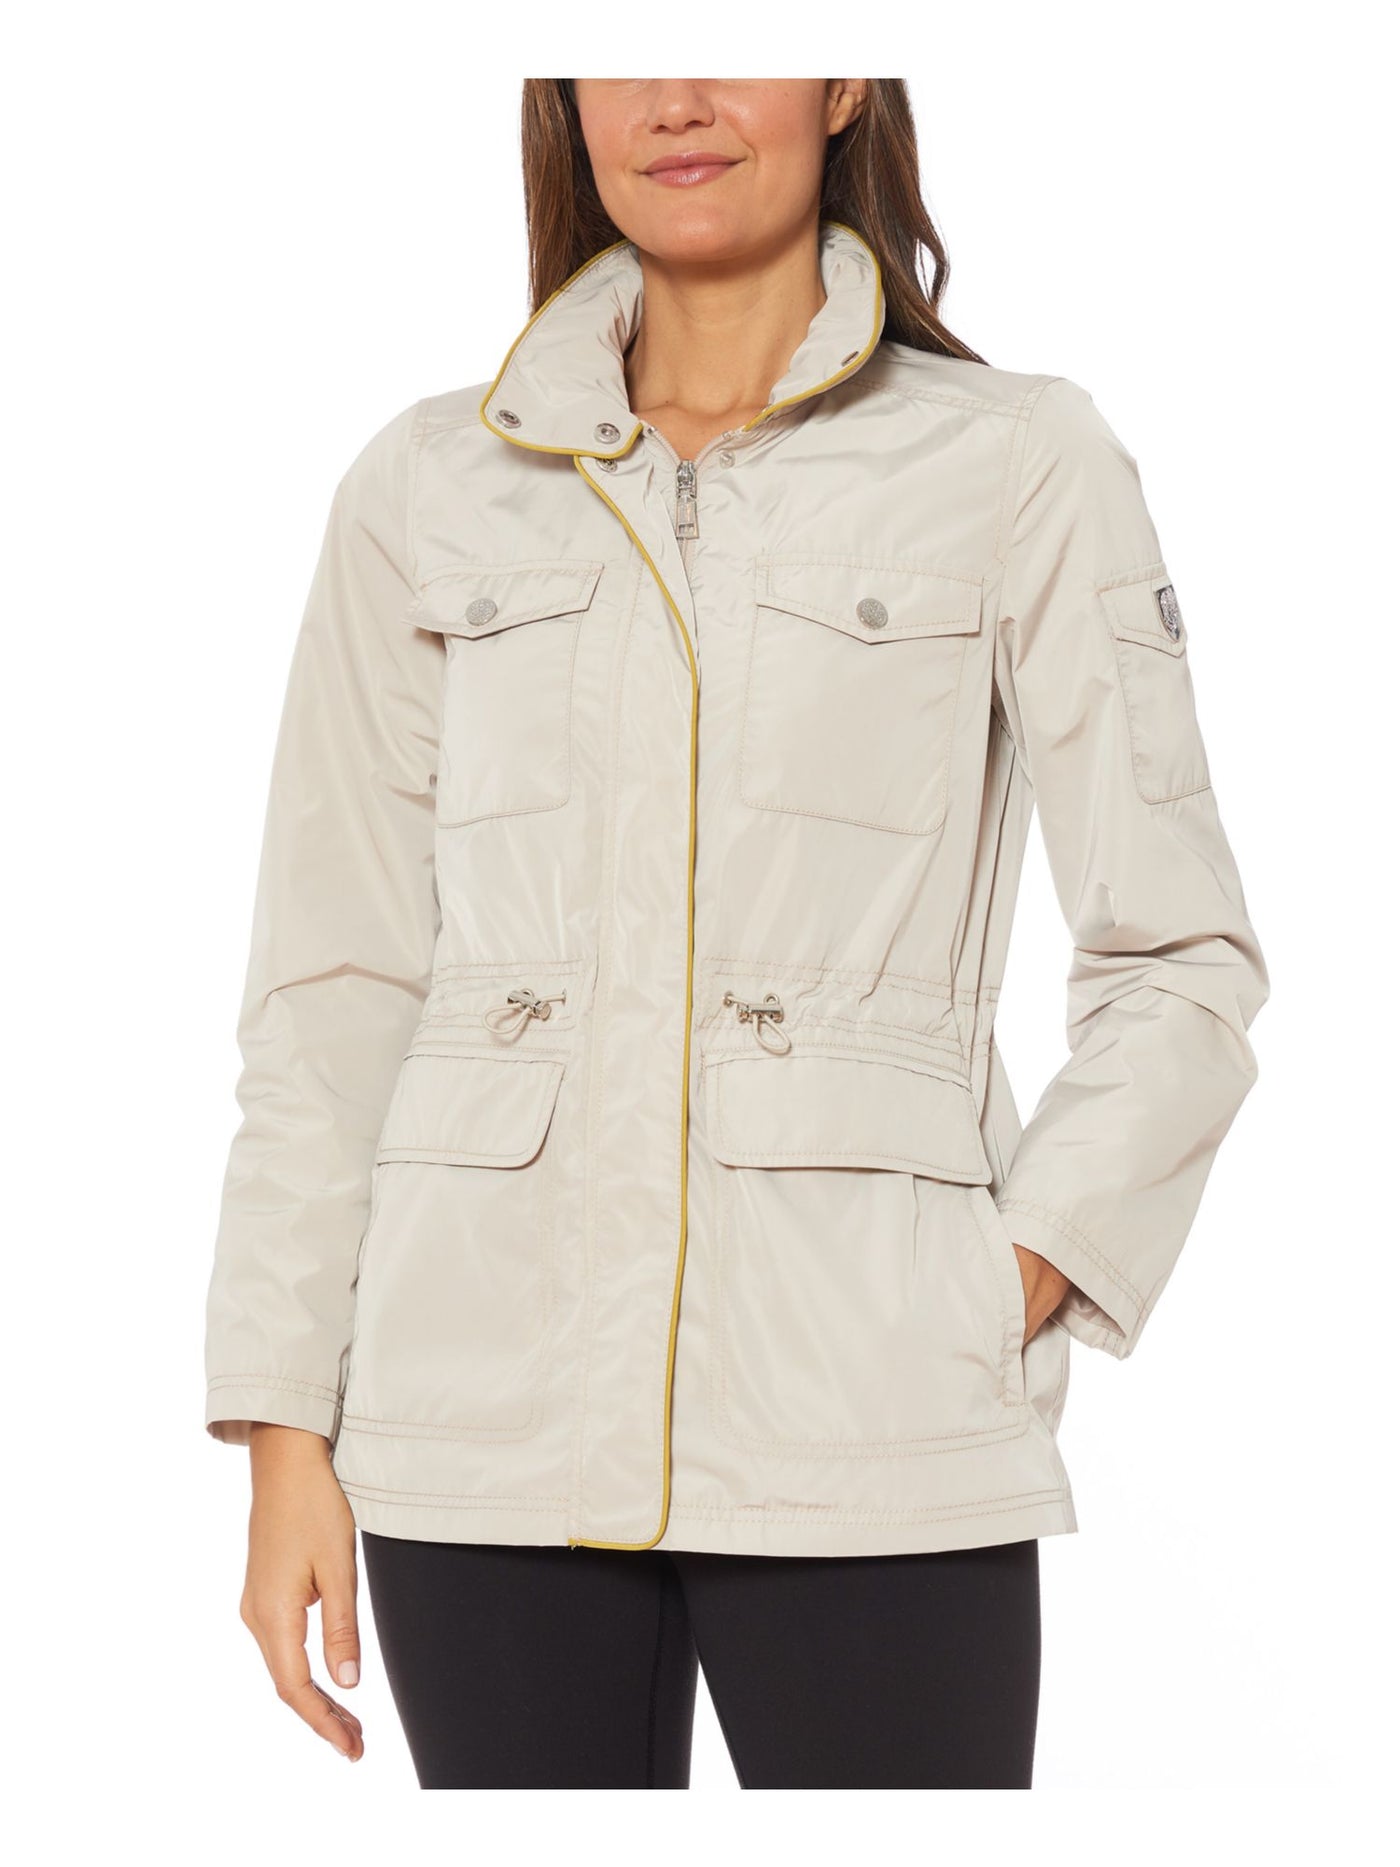 VINCE CAMUTO Womens Pocketed Zip Up Winter Jacket Coat